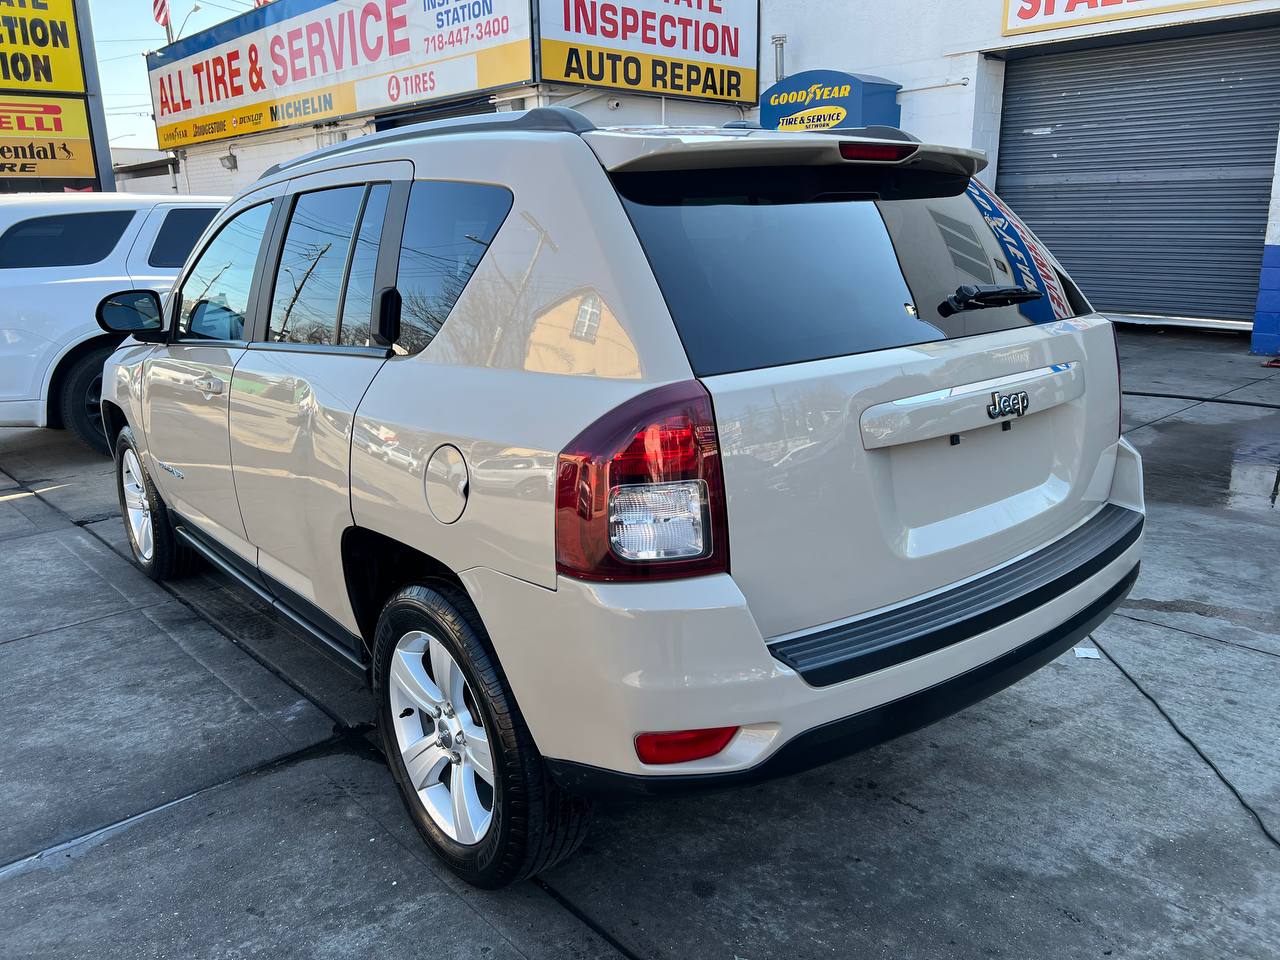 Used - Jeep Compass Sport SUV for sale in Staten Island NY